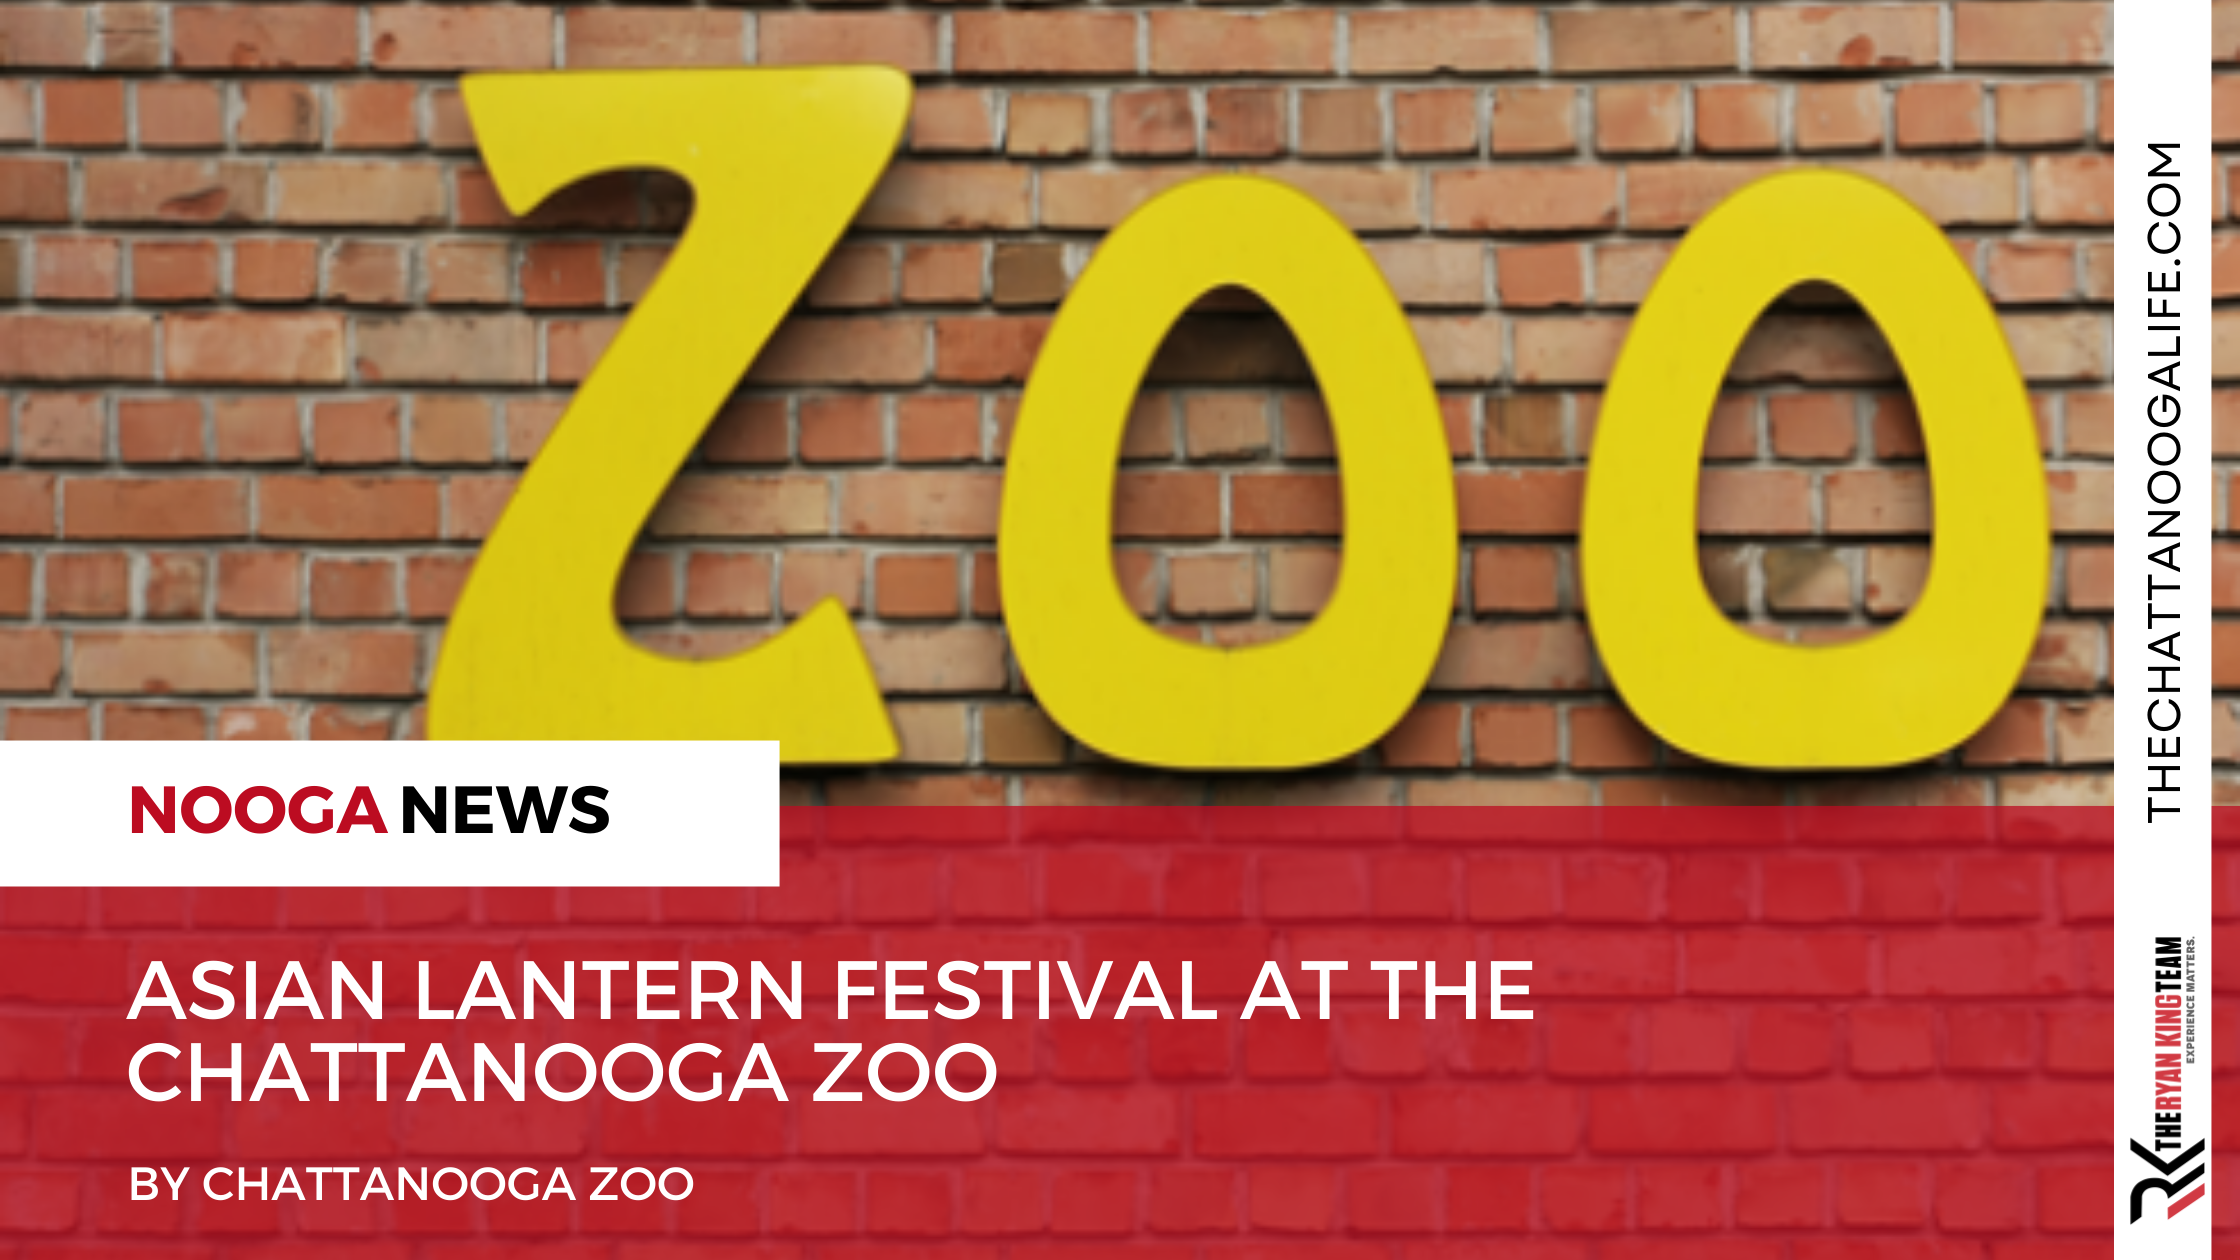 Asian Lantern Festival at the Chattanooga Zoo